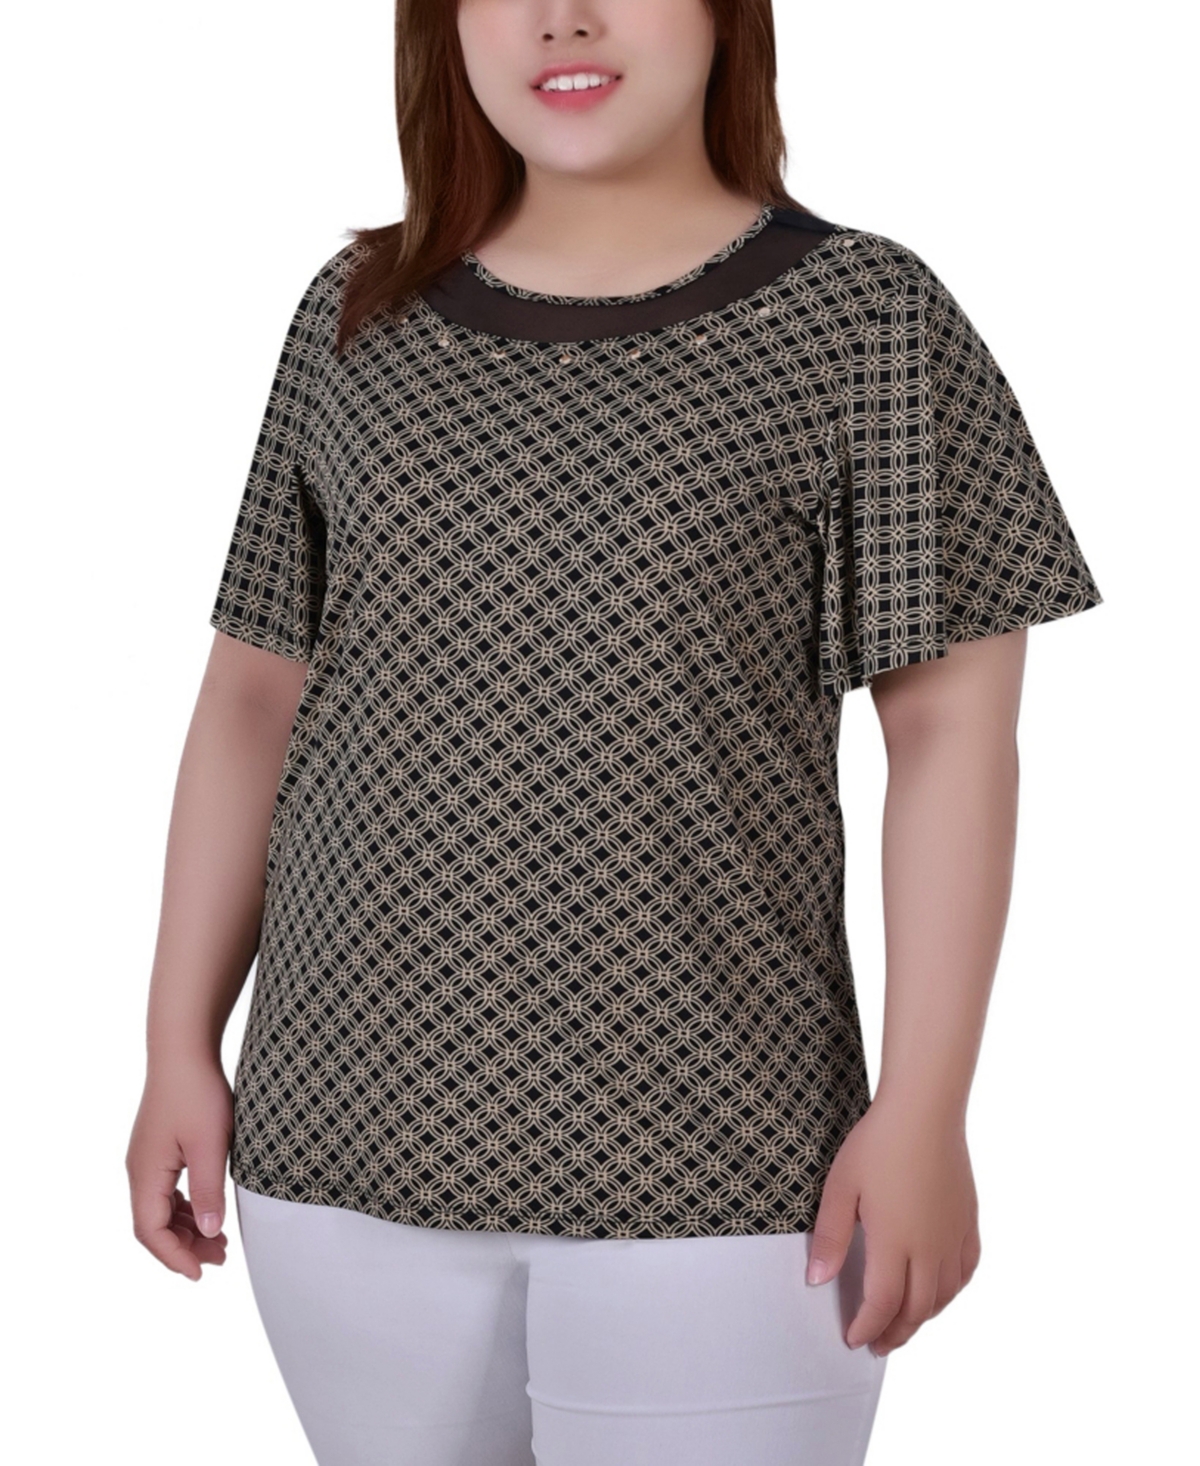 Plus Size Short Sleeve Knit Top with Sheer Inset - Black, Oxford Tan